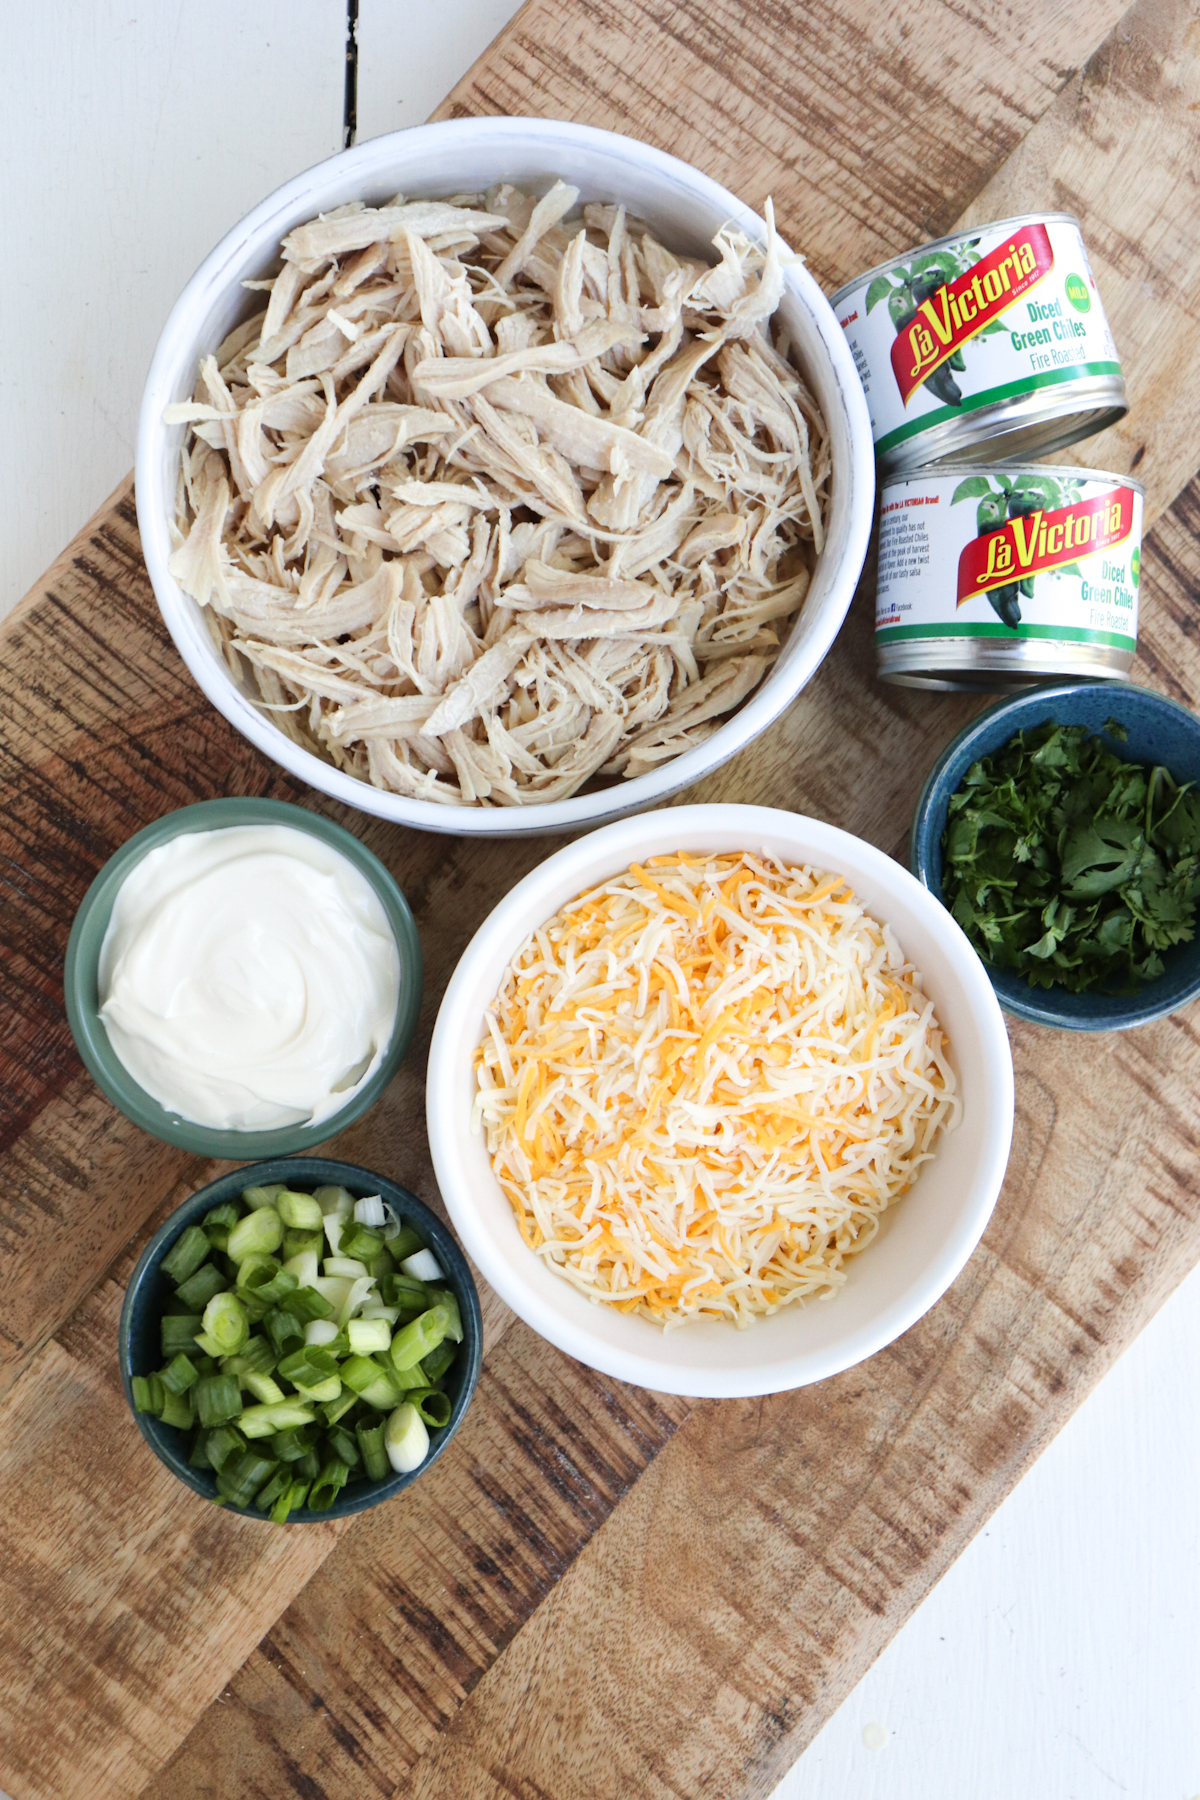 shredded chicken filling ingredients on a wooden background.